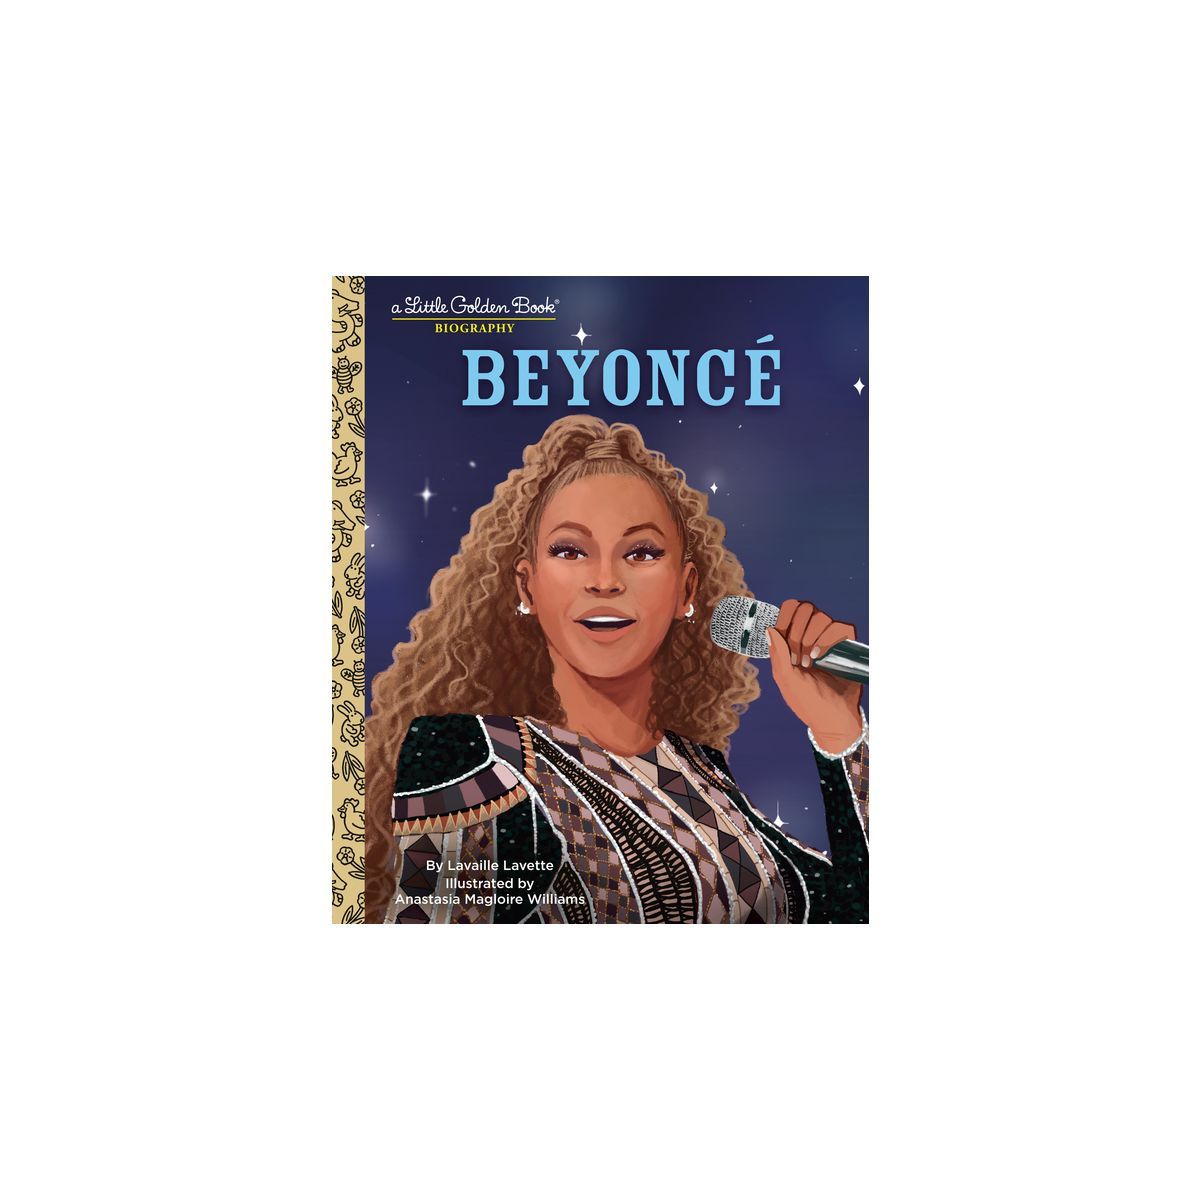 Beyonce: A Little Golden Book Biography (Presented by Ebony Jr.) - by  Lavaille Lavette (Hardcove... | Target